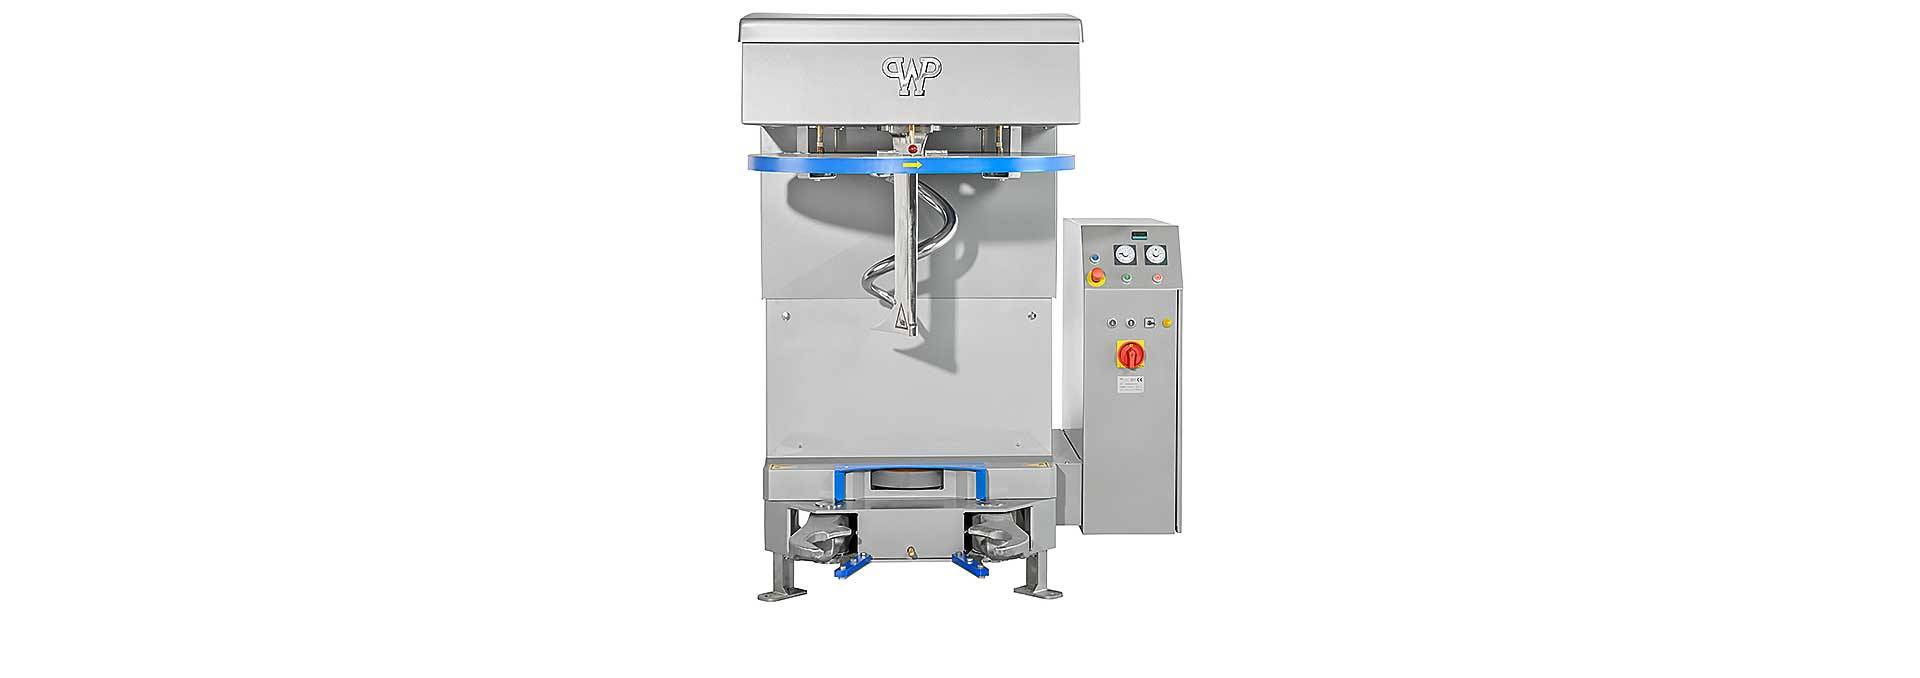 WP Kemper Kronos Spiral Mixer | WP Bakery Group USA, Retail, Wholesale and Industrial Baking Equipment and Food Service Equipment, Shelton, CT USA